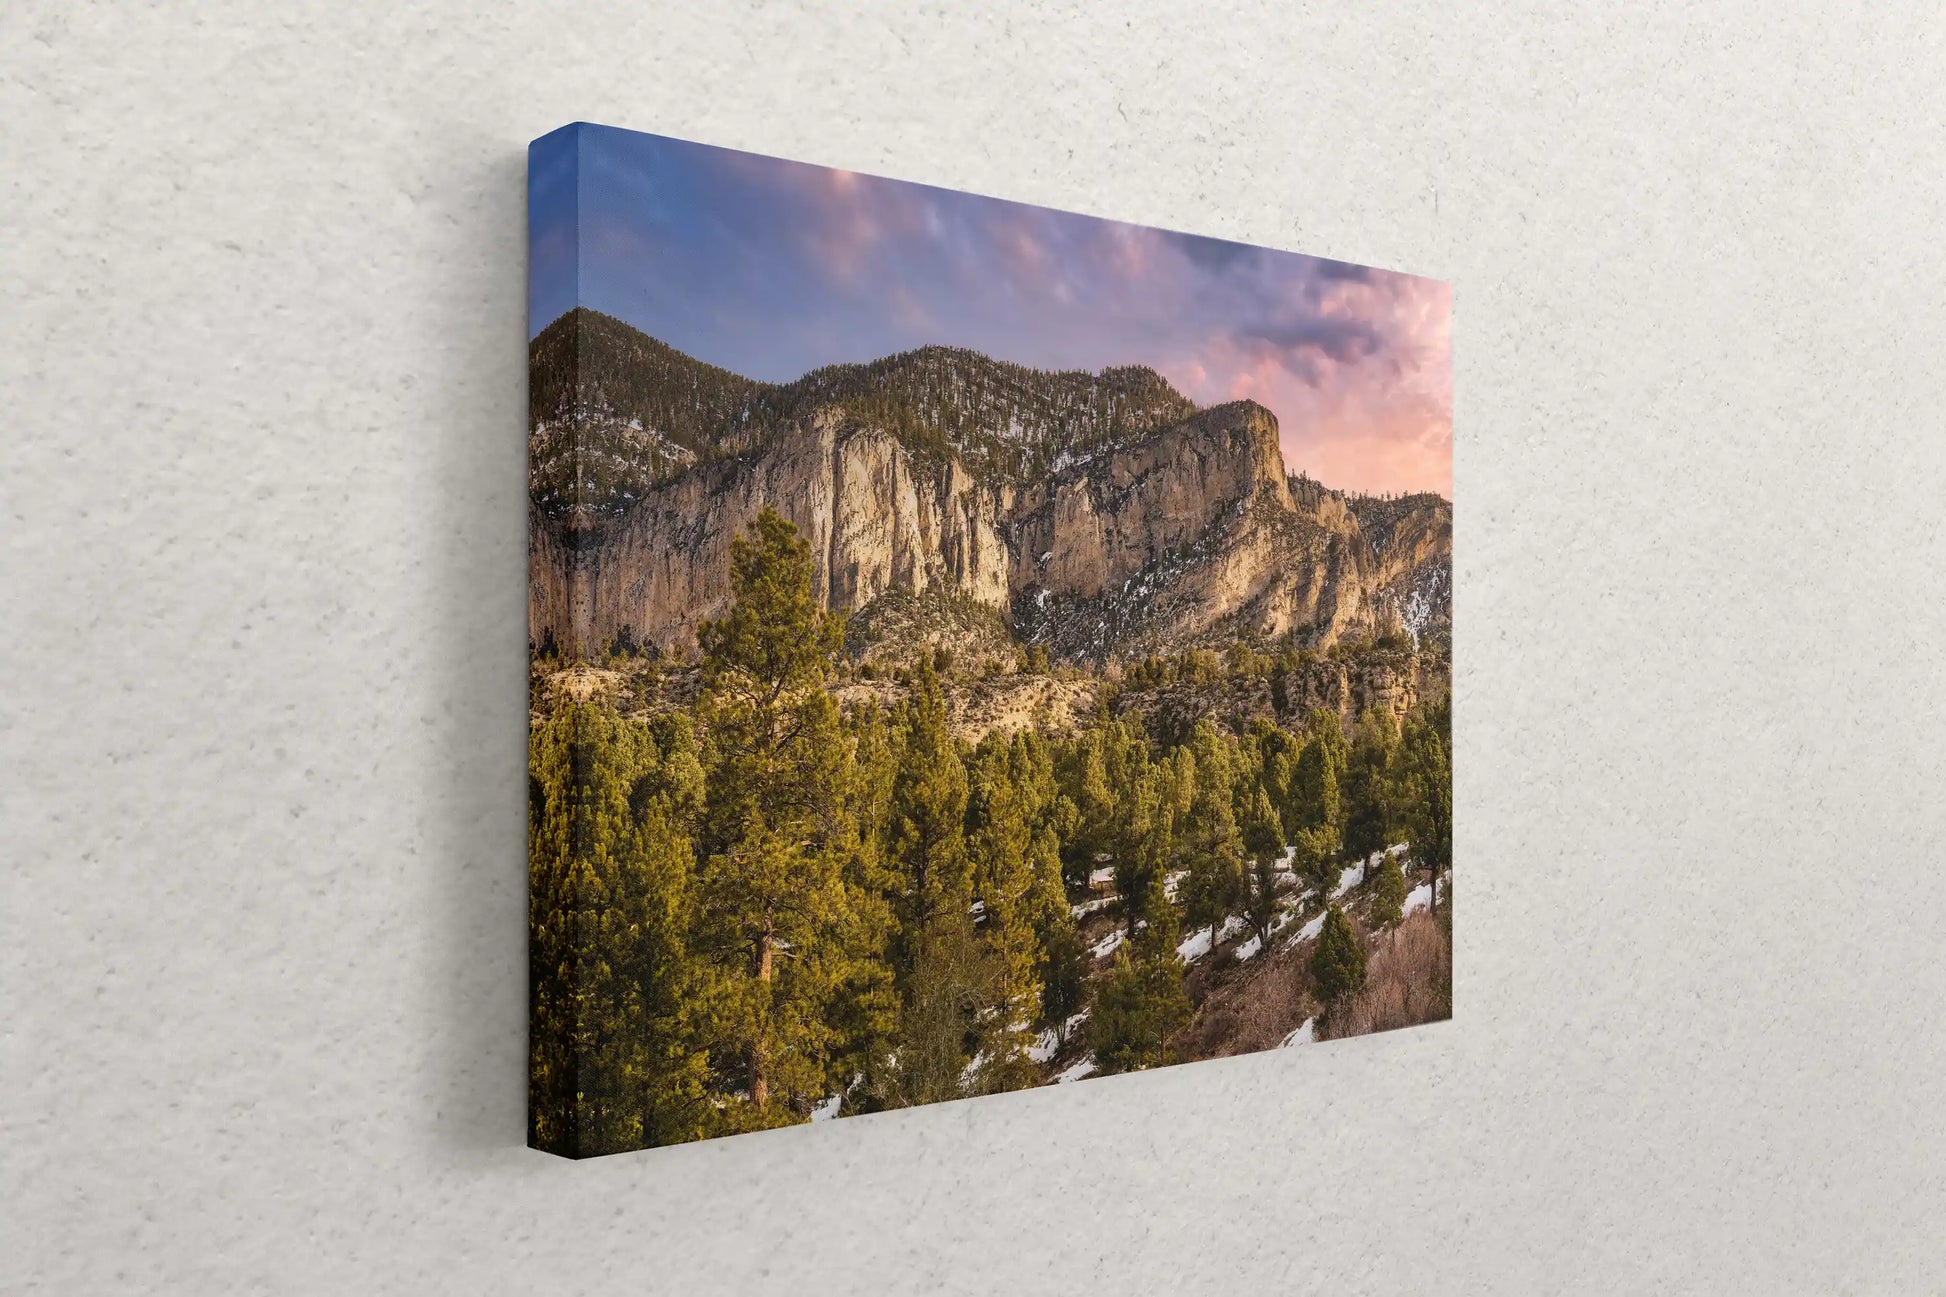 Side view of a canvas print on a wall, depicting Fletcher Peak at Mt Charleston, blending nature's grandeur with a touch of artistic serenity.